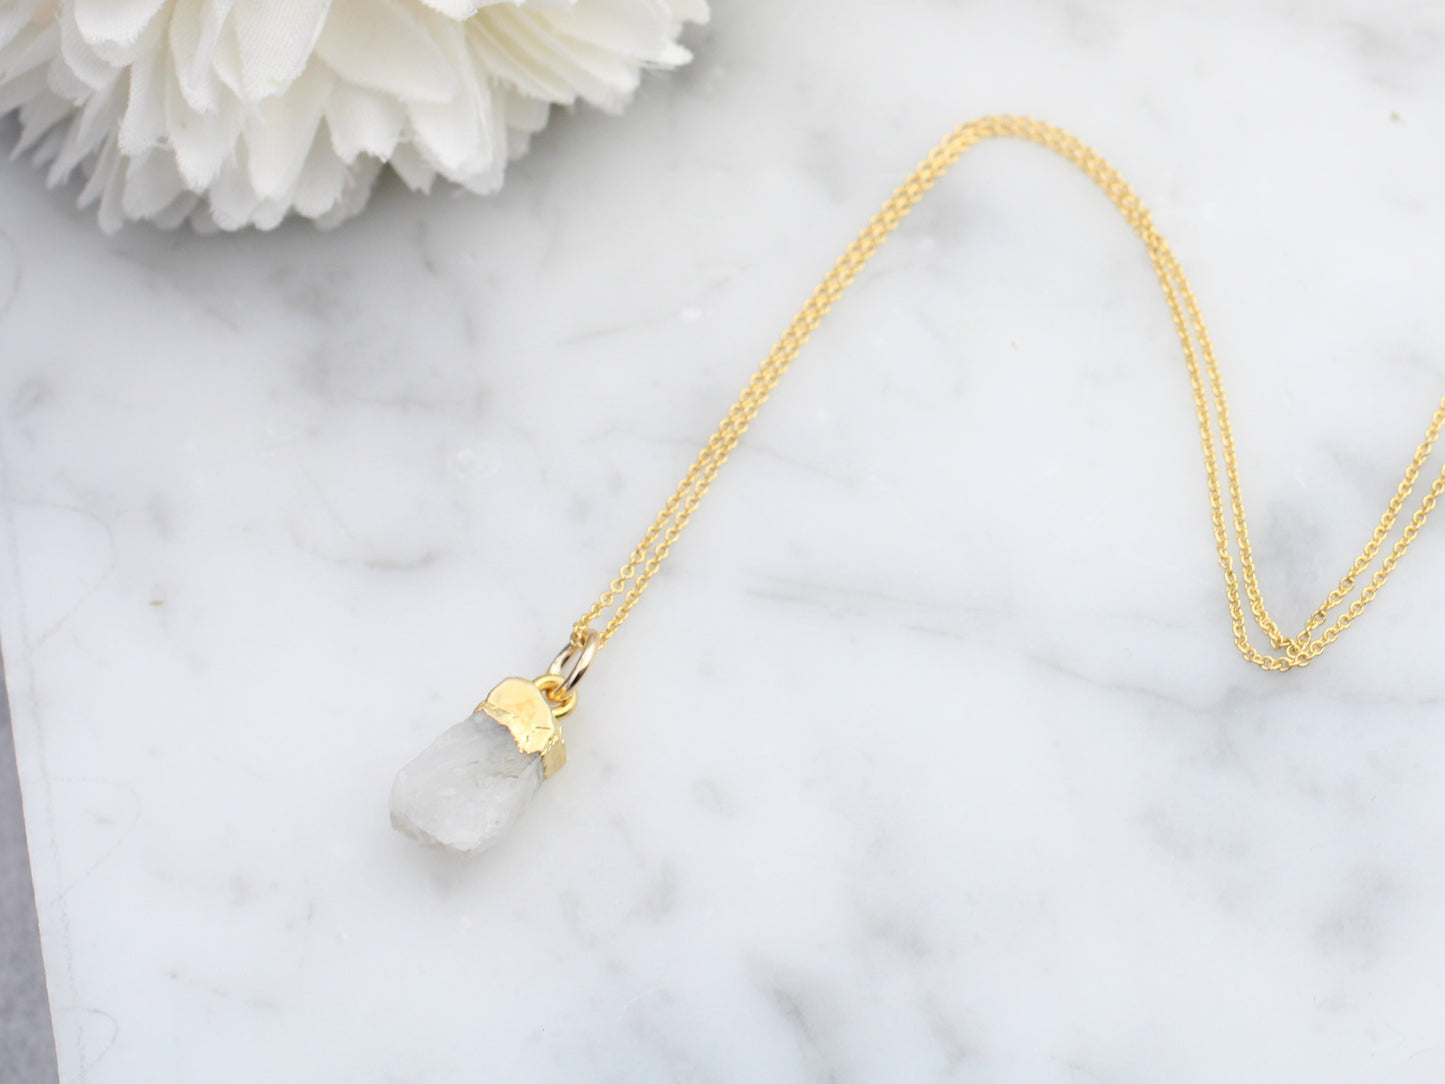 Gold moonstone necklace. June birthstone necklace.